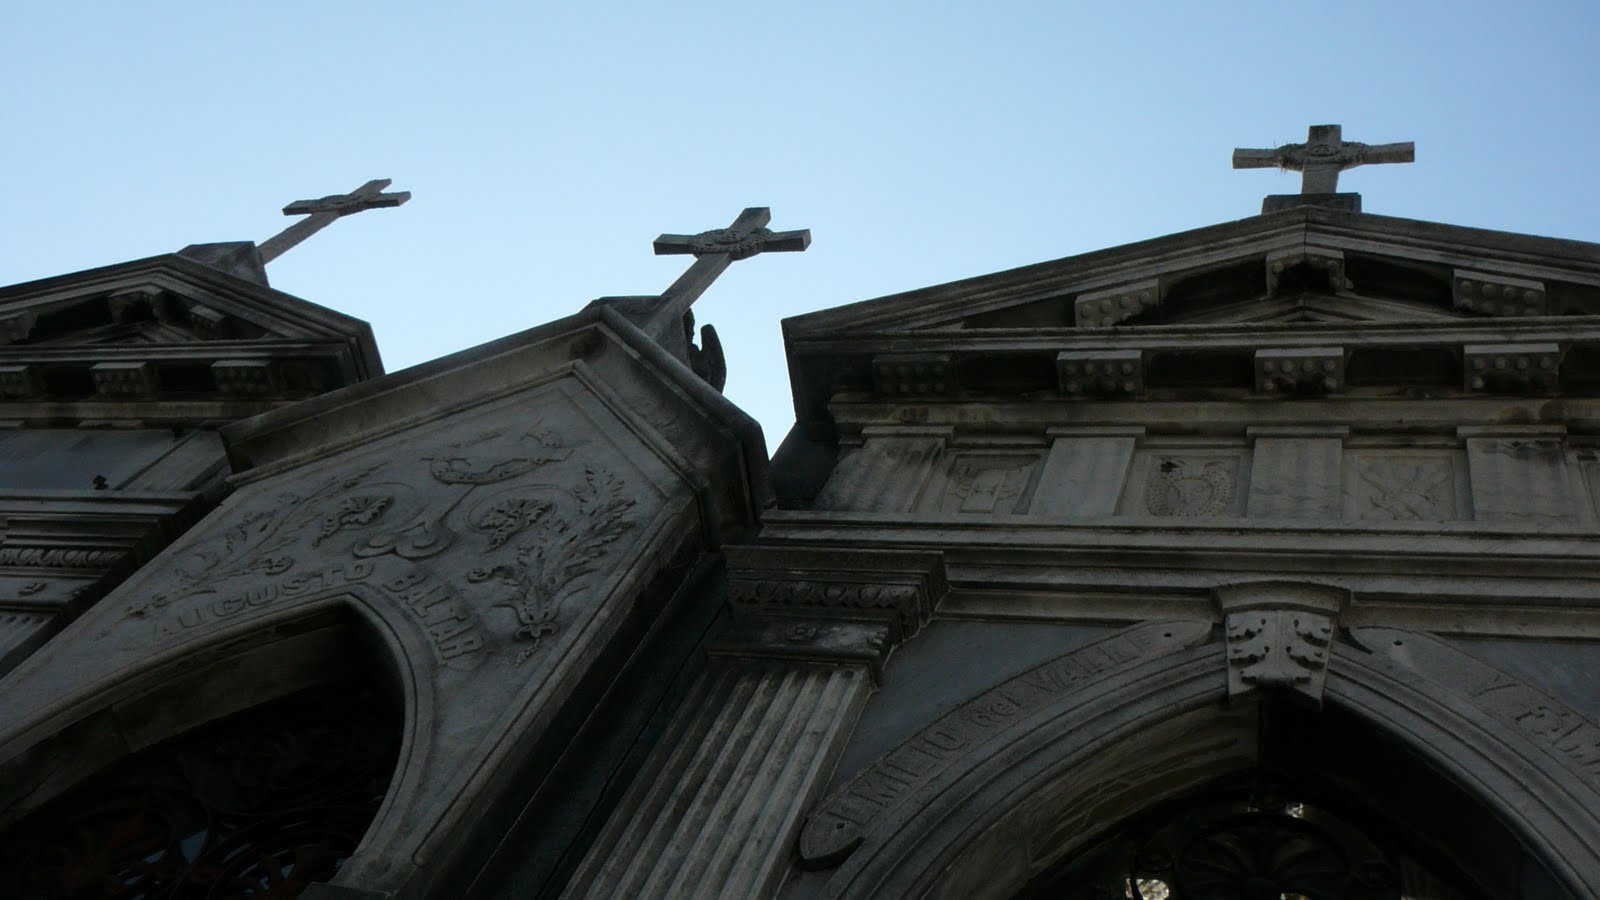 Other Climes: Recoleta cemetery